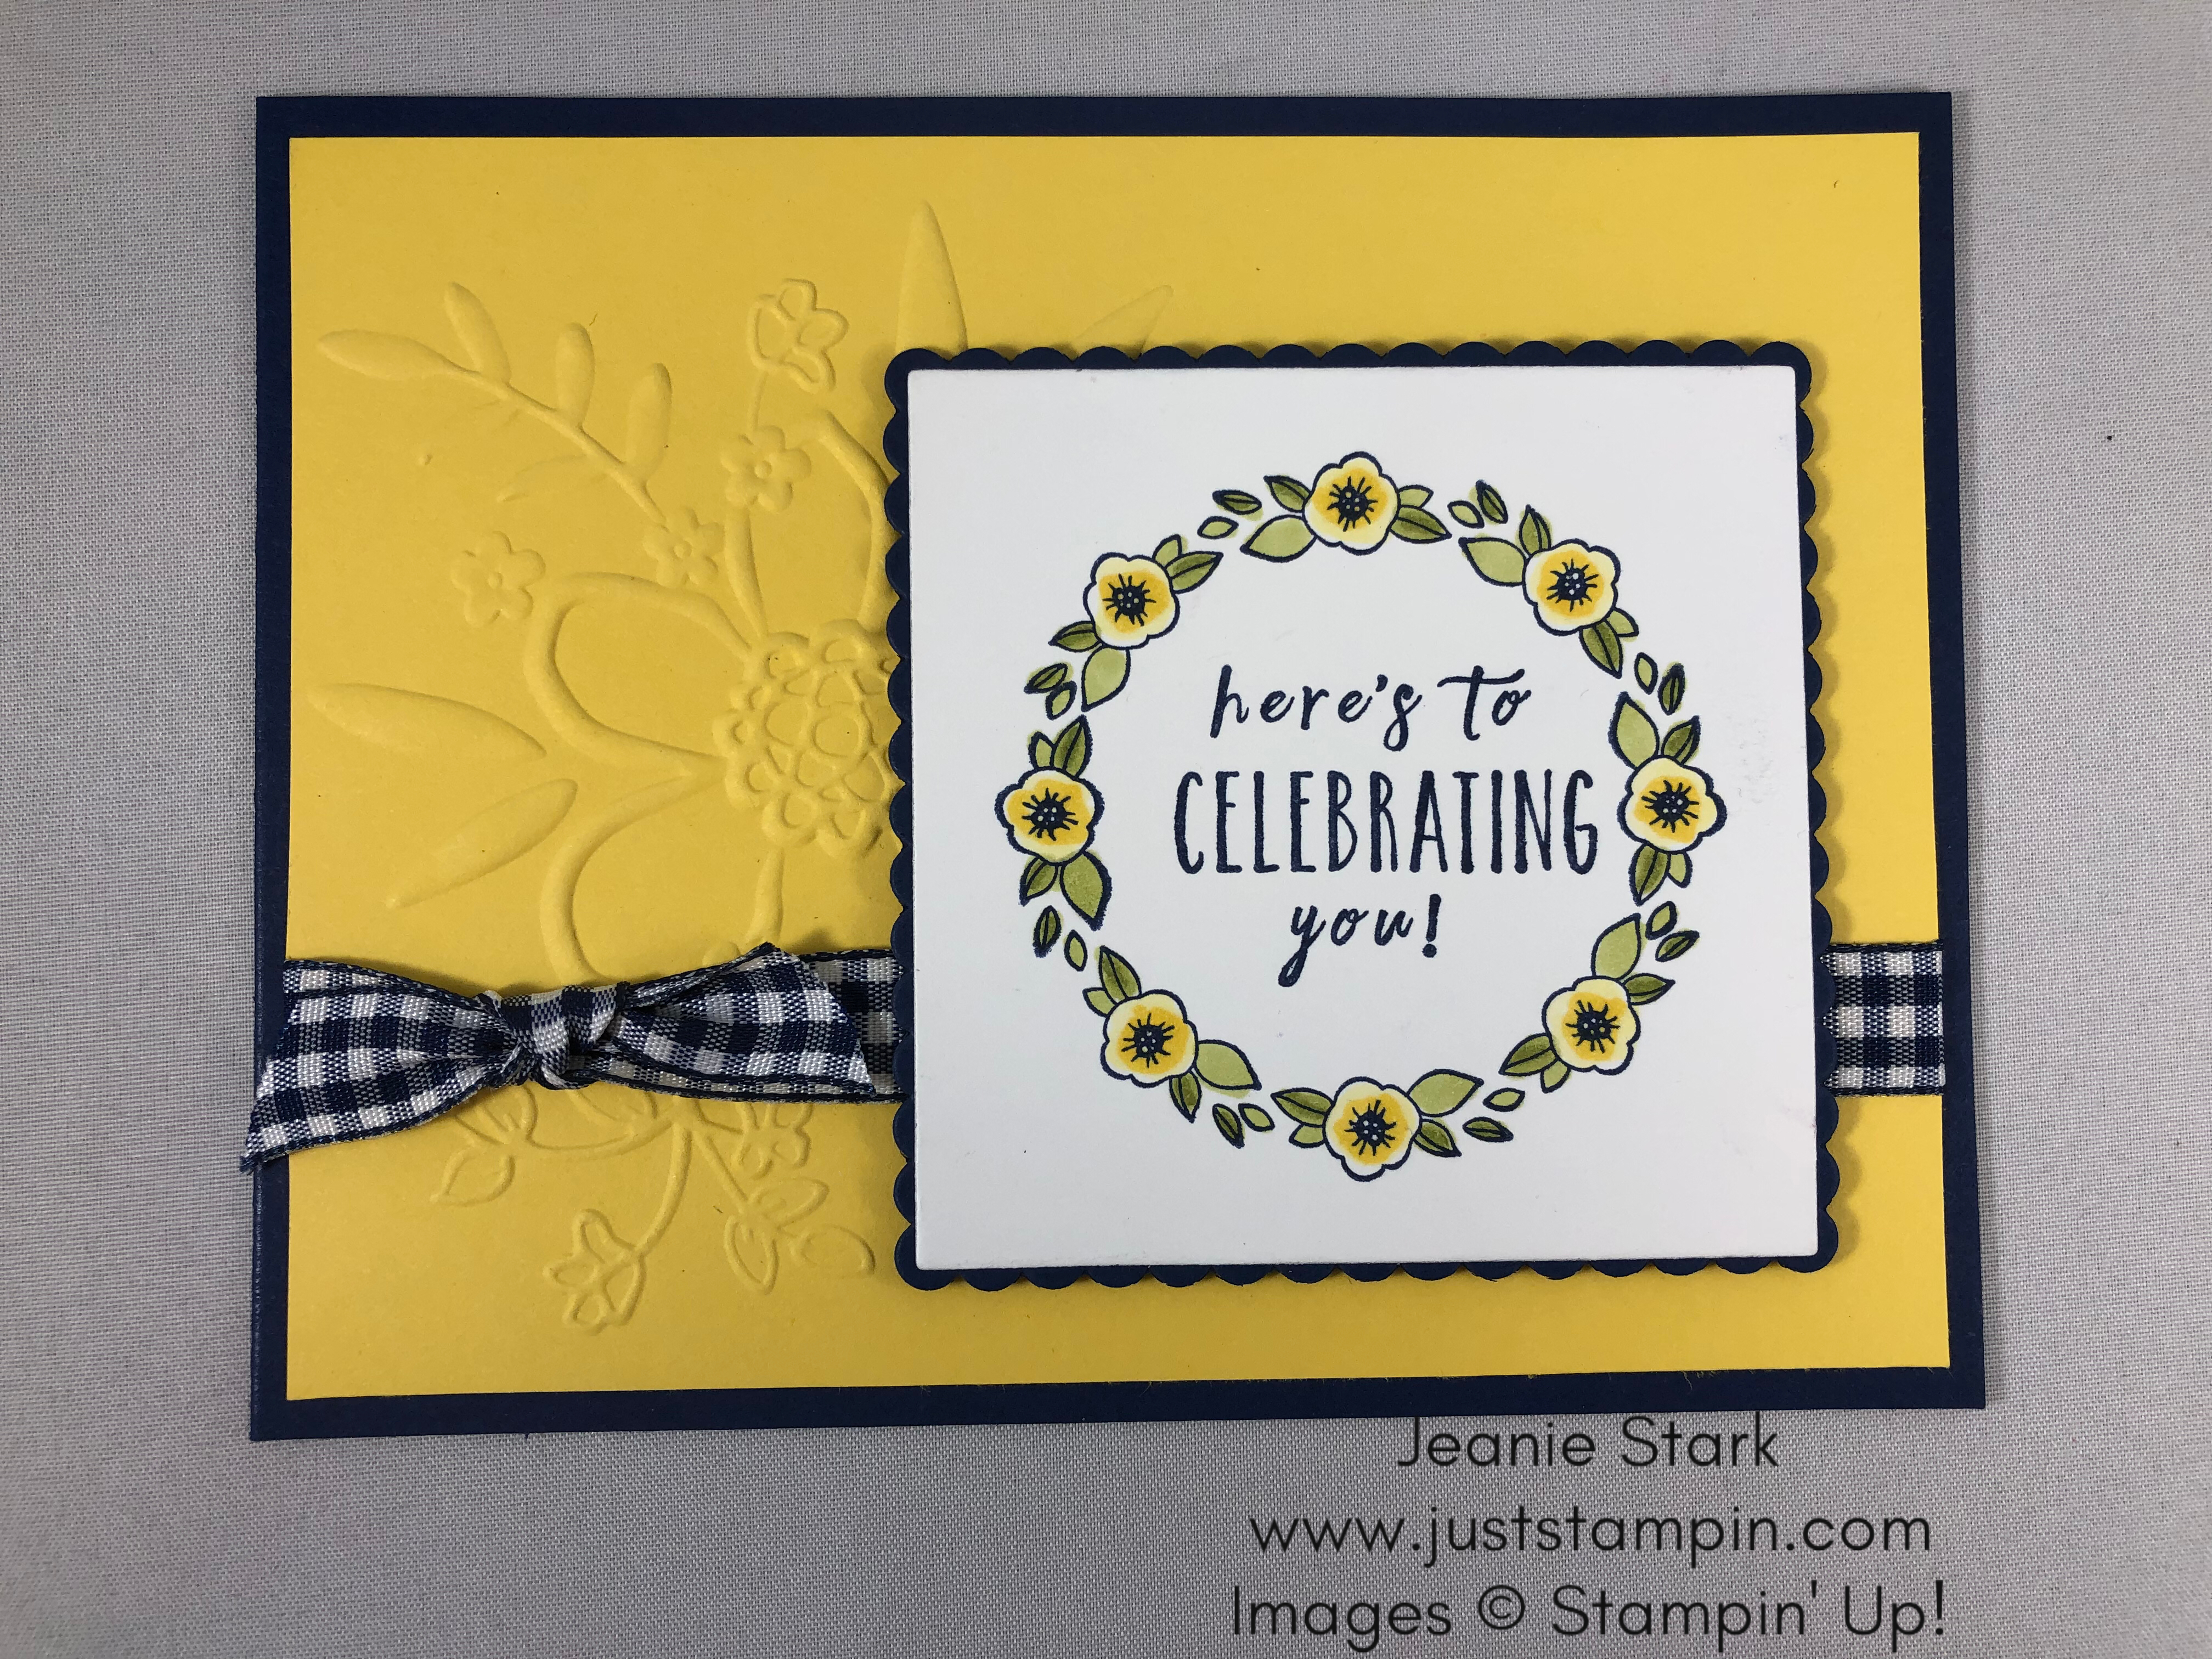 Stampin Up Perennial Birthday and Accented Blooms birthday wreath card idea made using the Stamparatus and Lovely Floral Embossing Folder - Jeanie Stark StampinUp